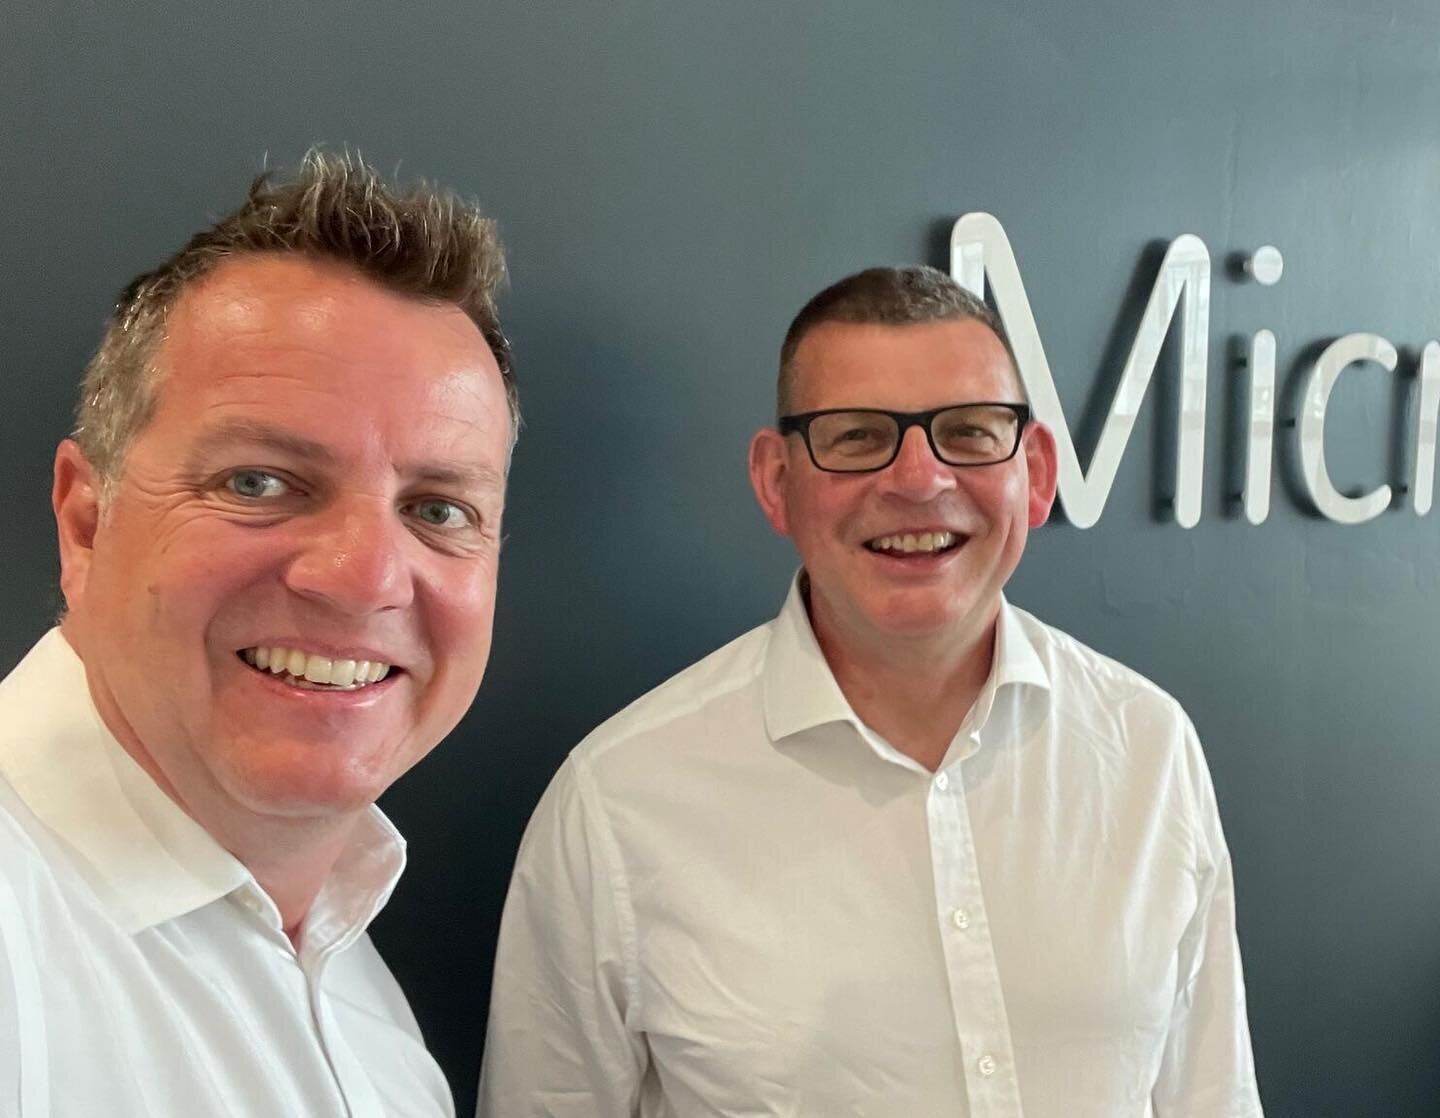 Welcoming David Fudge to the Micrima team, joining us as Head of IT!